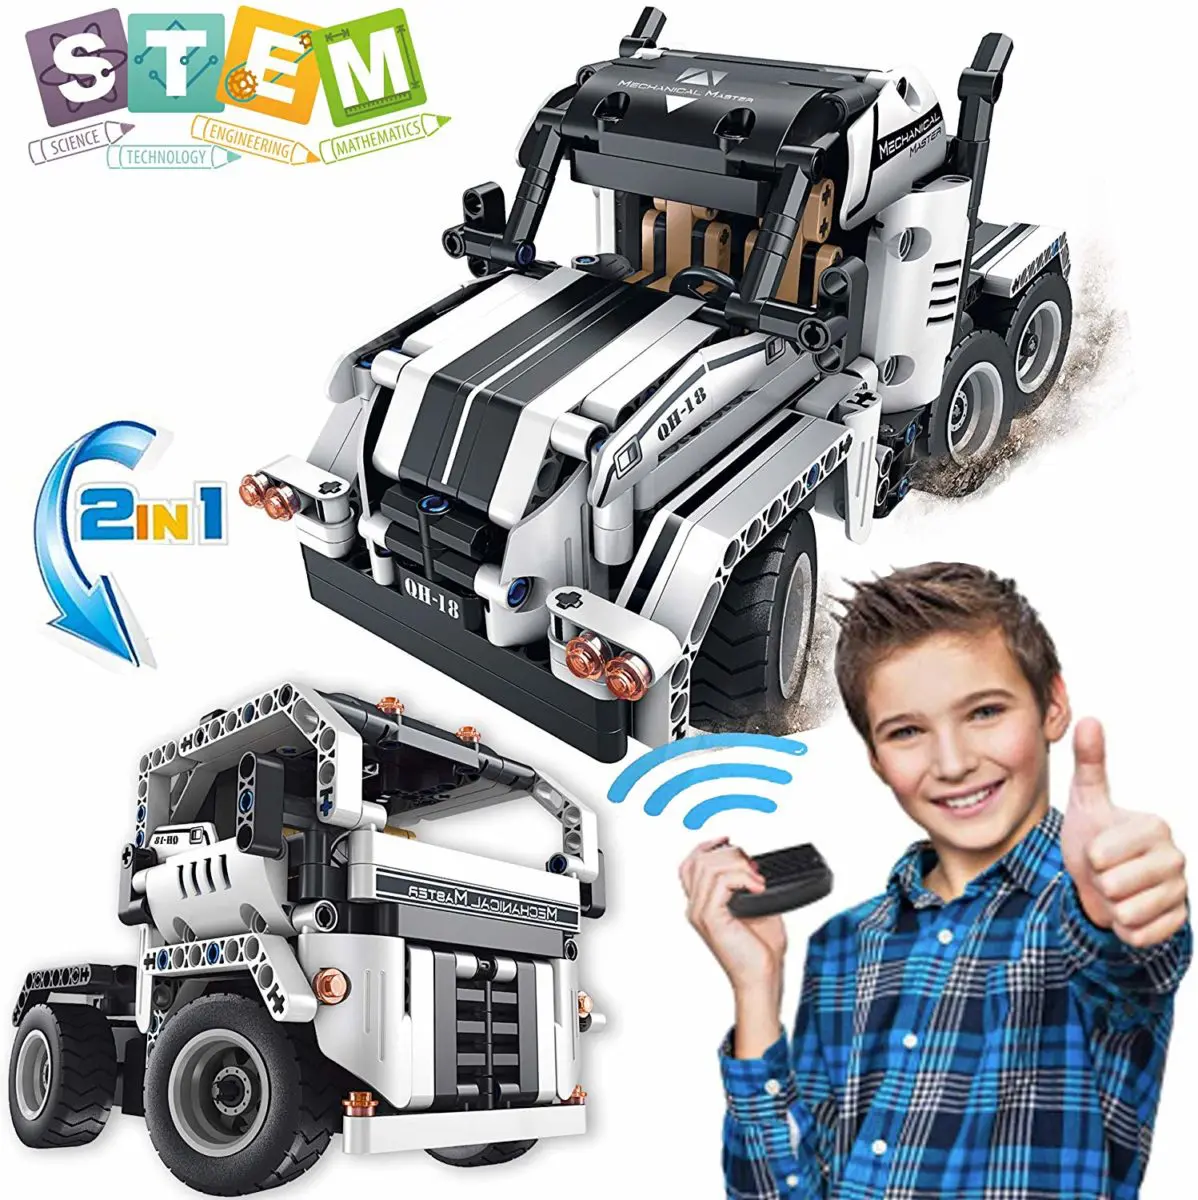 STEM Building Toys 2-in-1 Building Kit - Top Toys and Gifts for Seven Year Old Boys 1